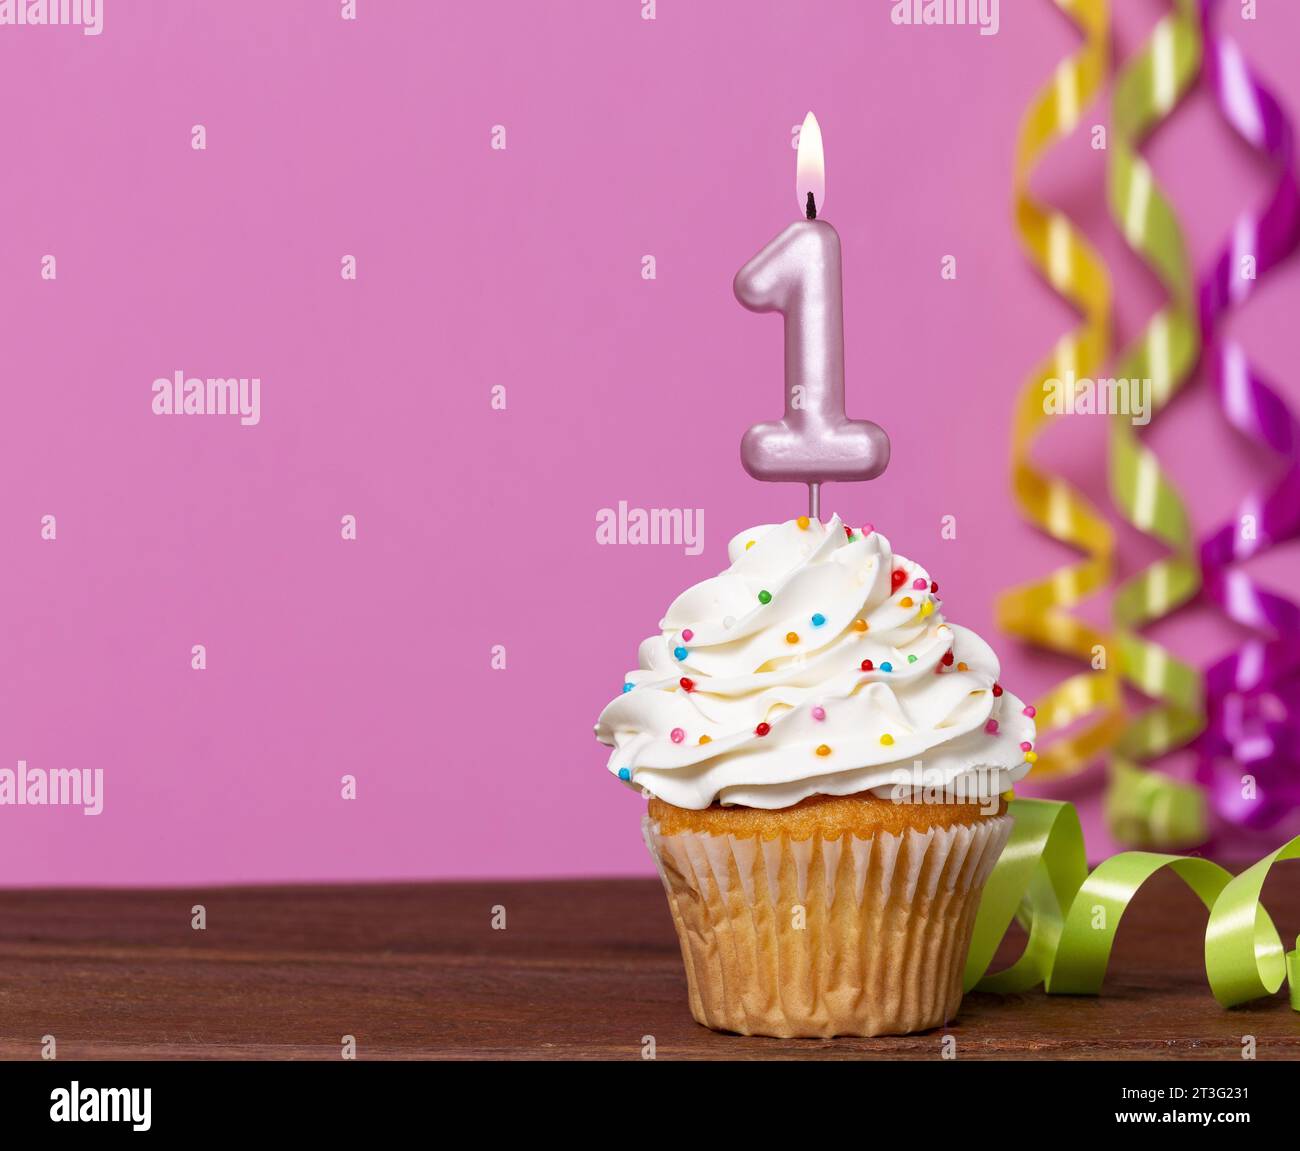 1 year birthday card Banque d'images vectorielles - Alamy